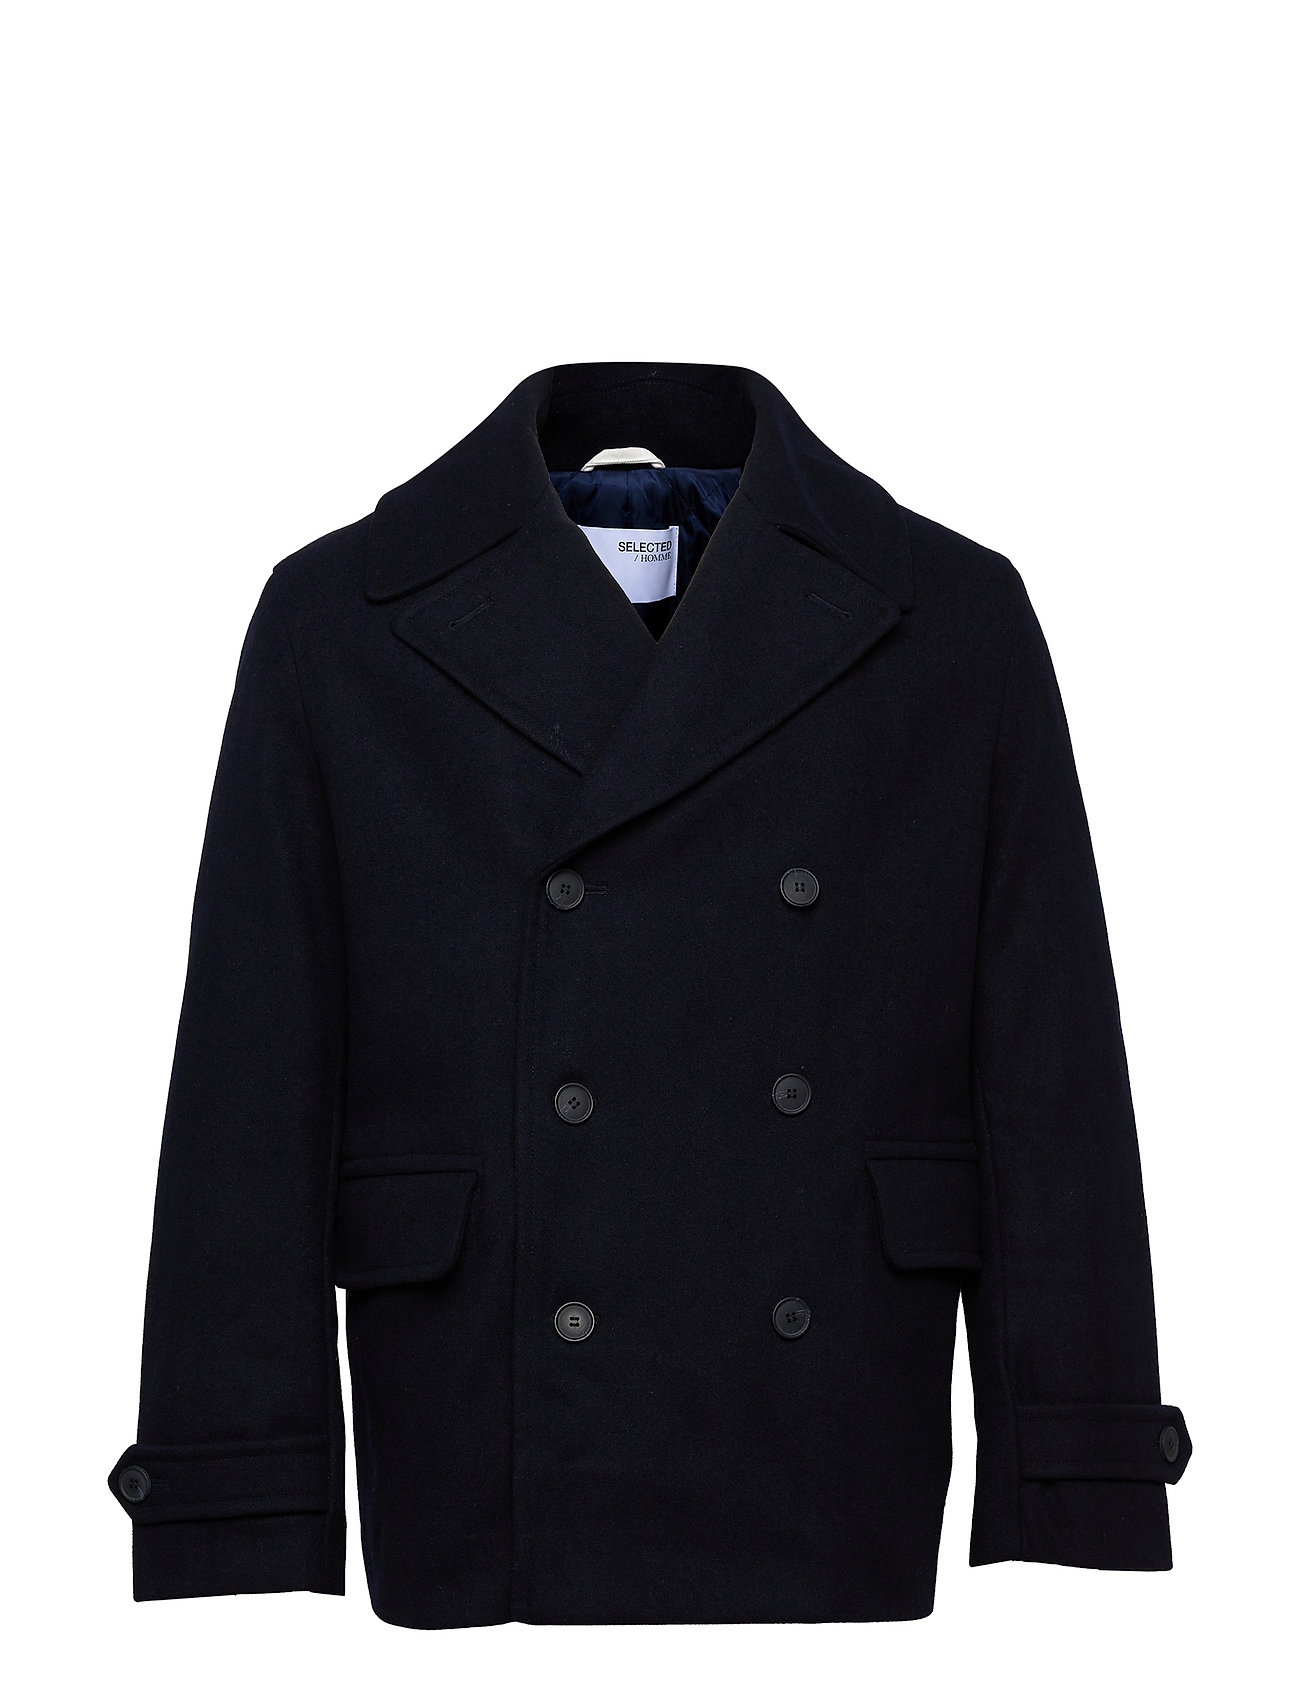 Homme 169.99 Boozt.com. easy delivery Buy - Winter online at Peacoat and U returns €. from Slhnelson Homme Selected Selected Fast Coats